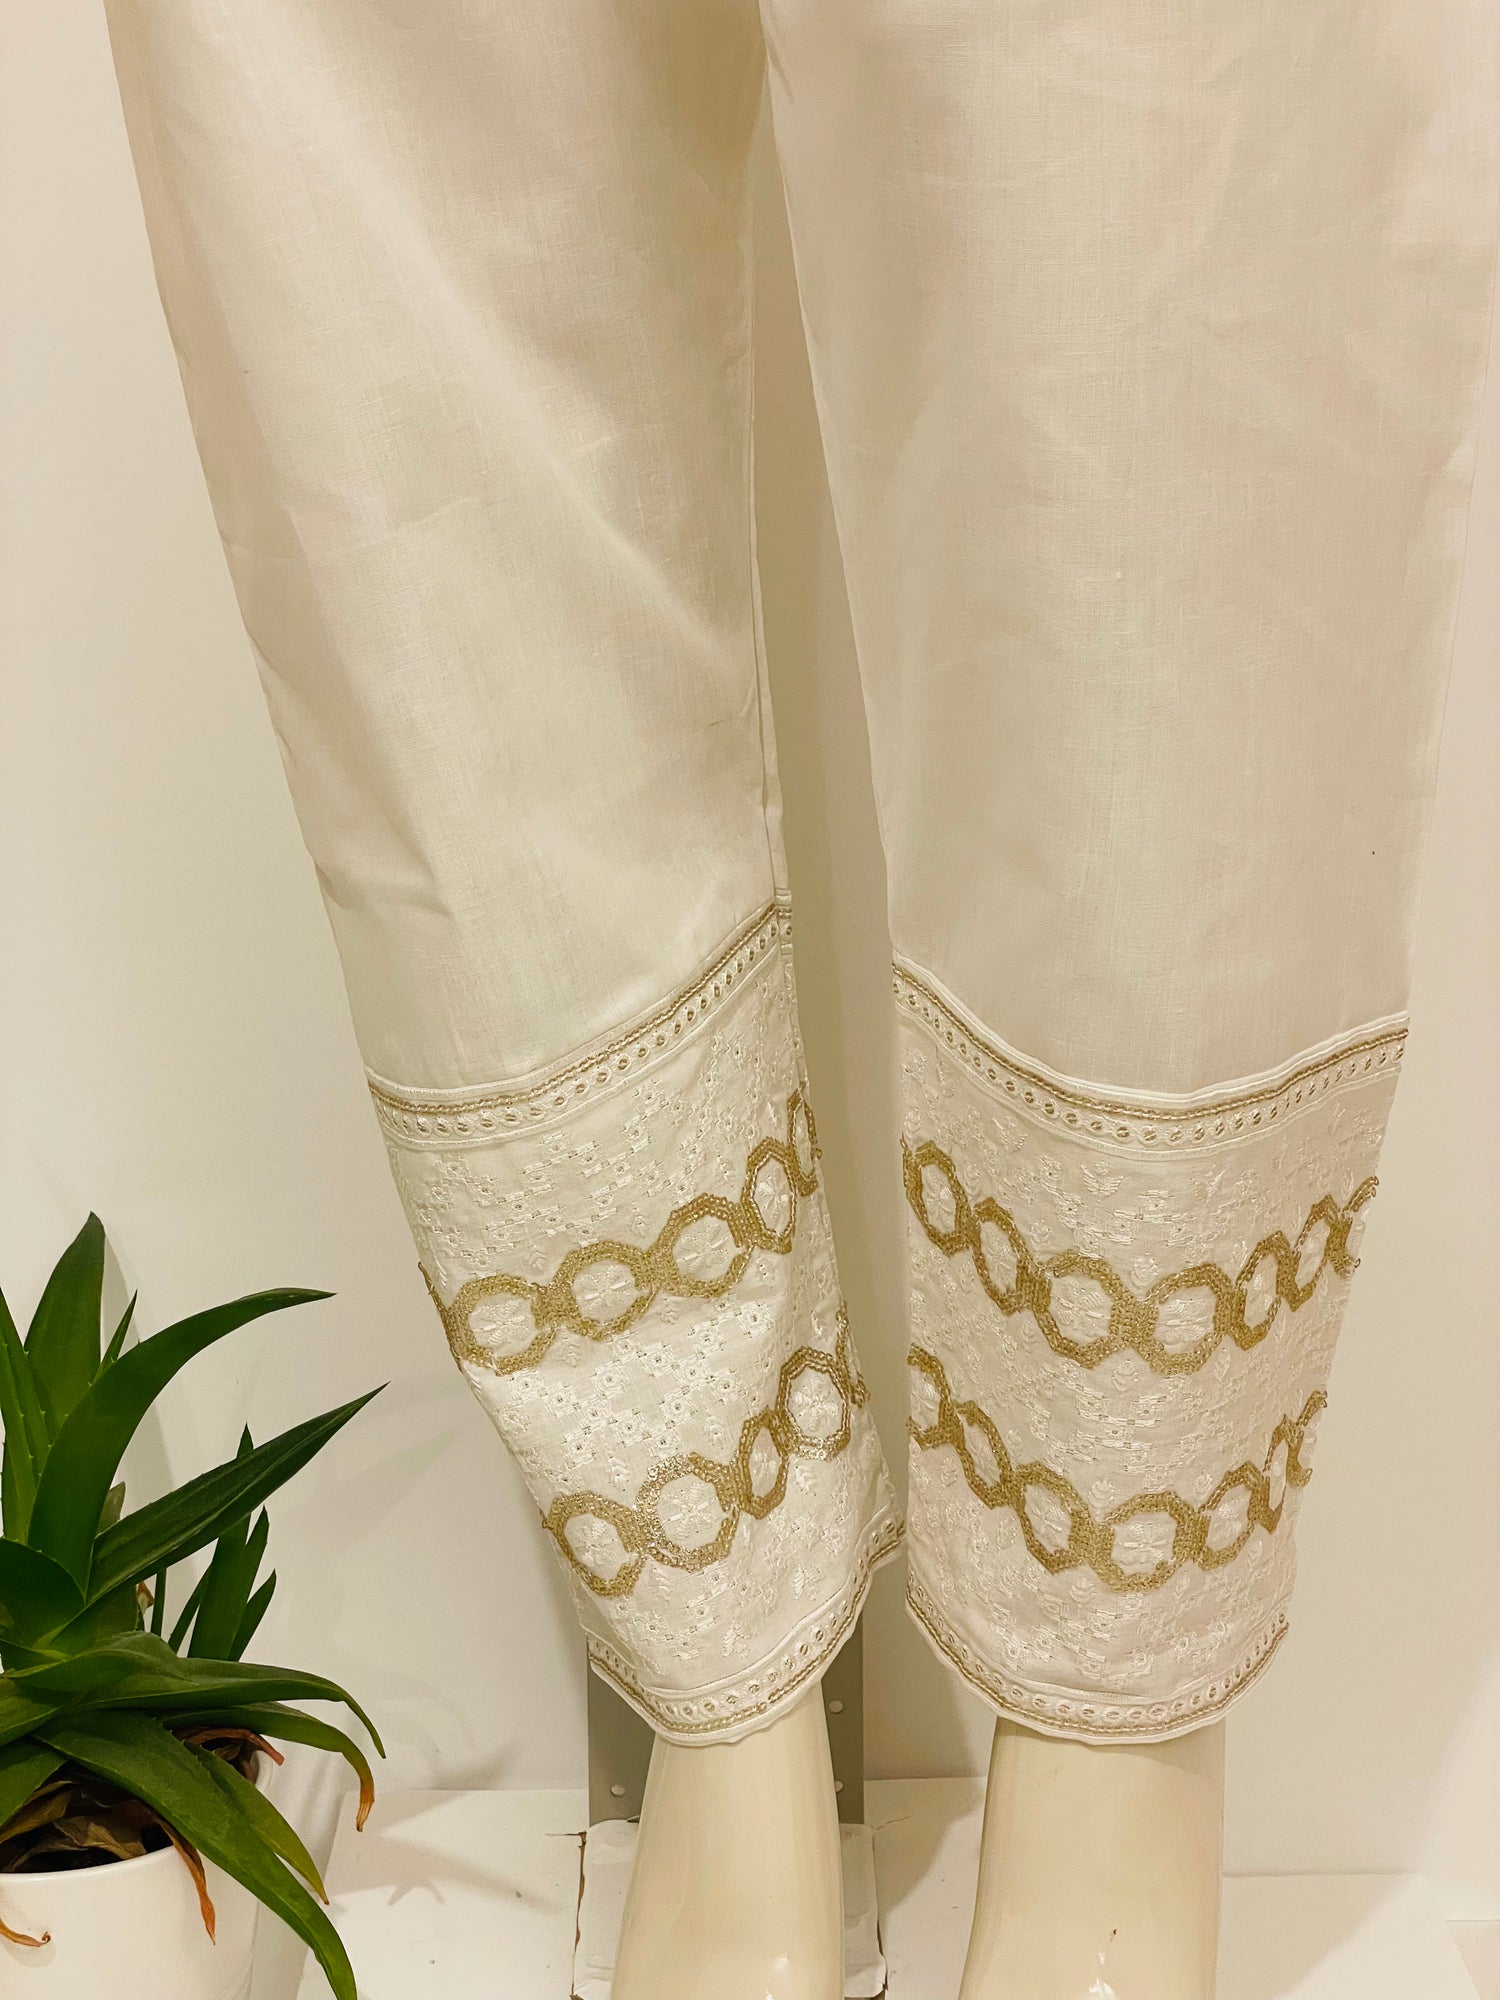 Buy JAIPUR ATTIRE Women White Pleated Cigarette Trousers - Trousers for  Women 15204104 | Myntra